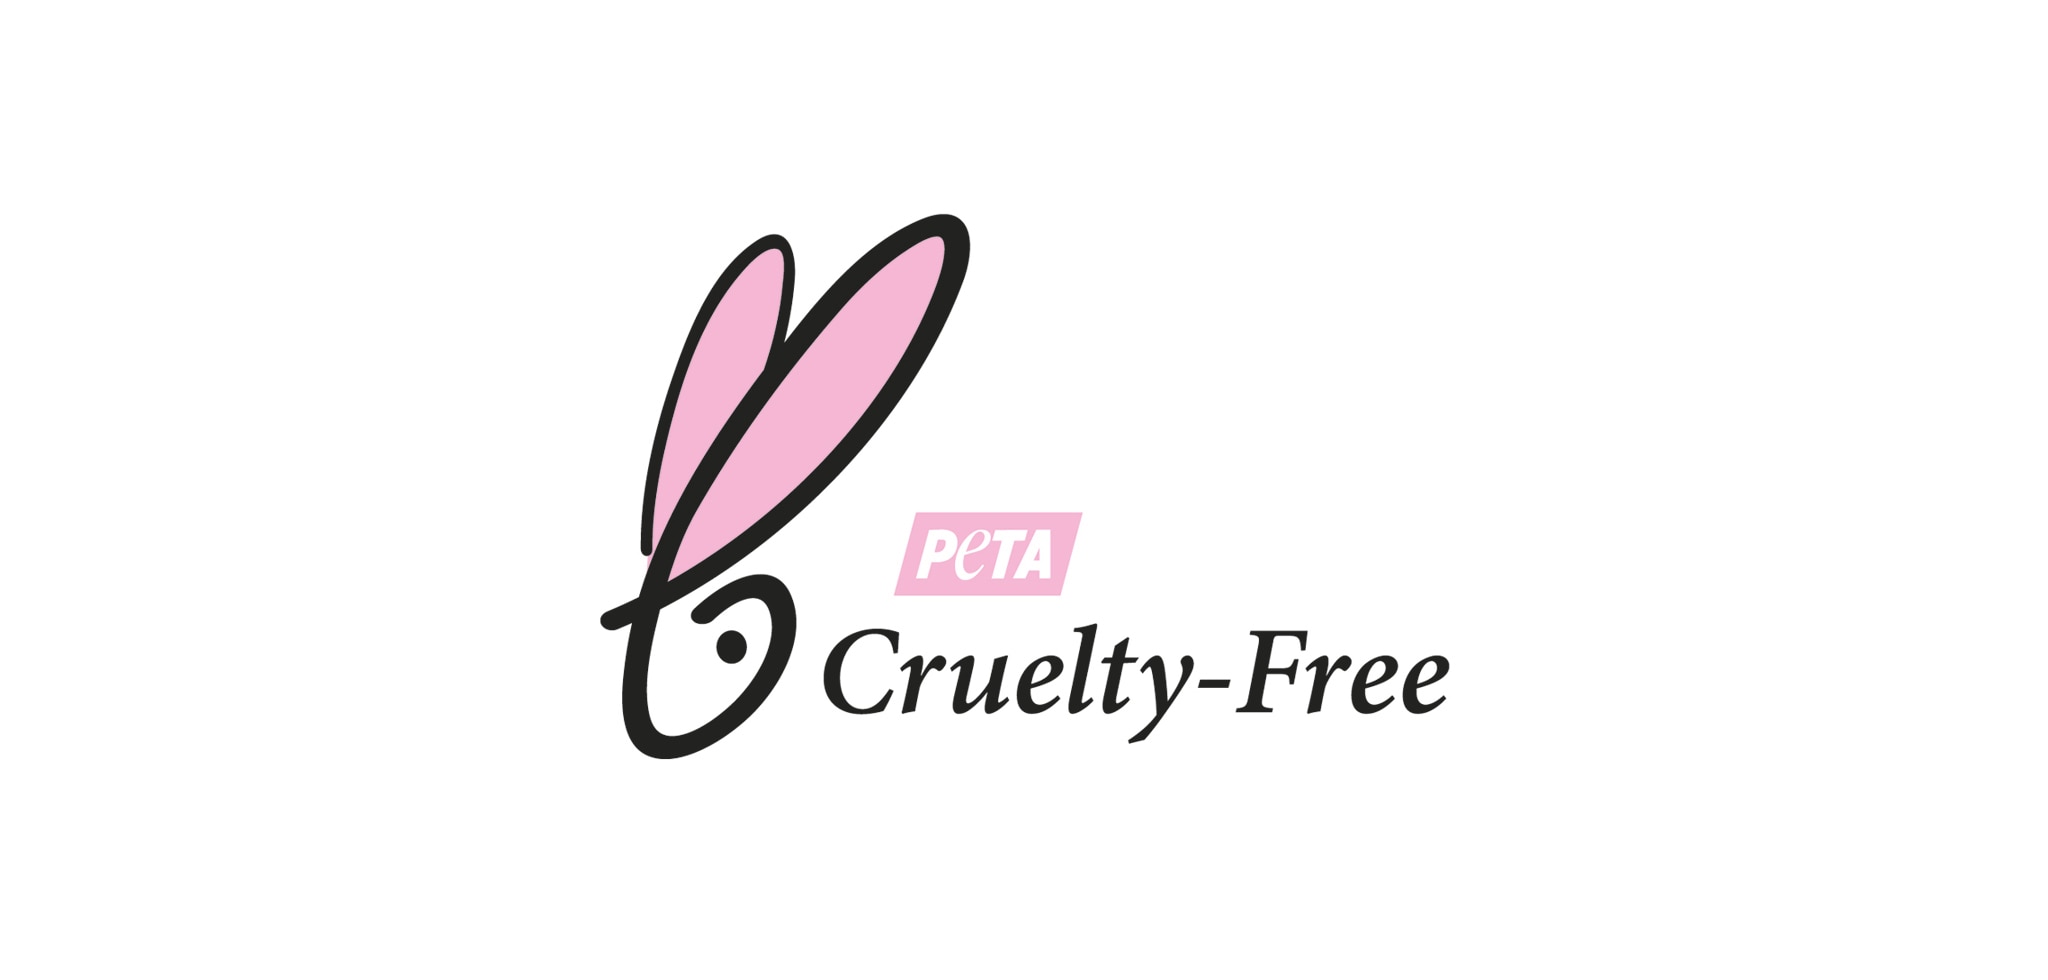 Our commitment to Cruelty-Free beauty – Dove